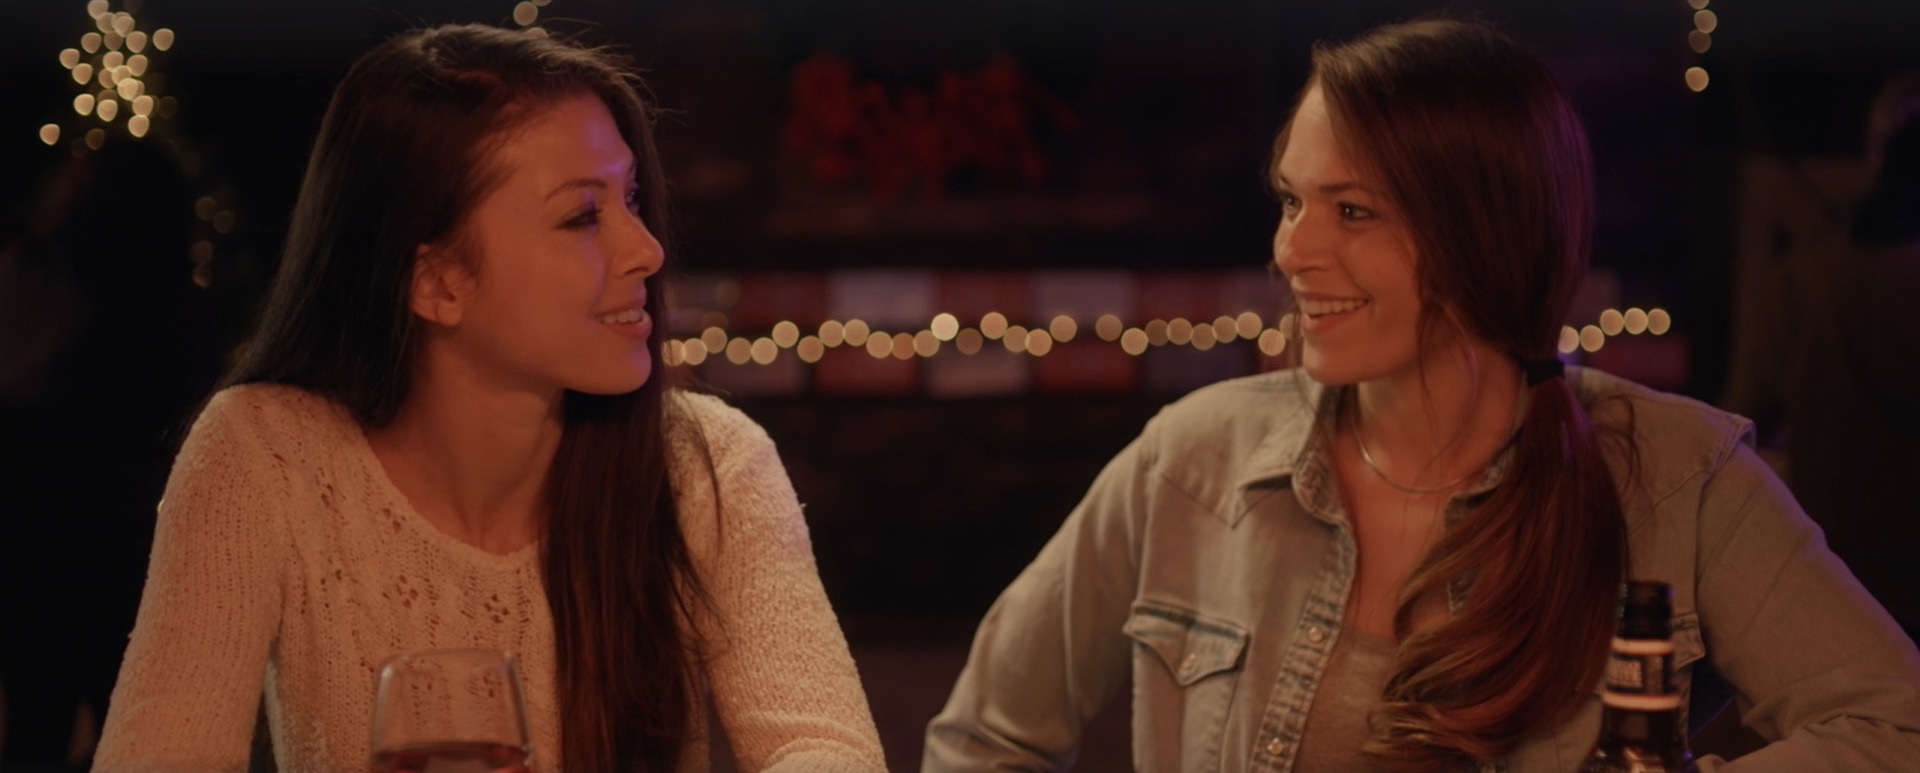 Haleye and Kate from Christmas At The Ranch sit at a bar smiling at each other